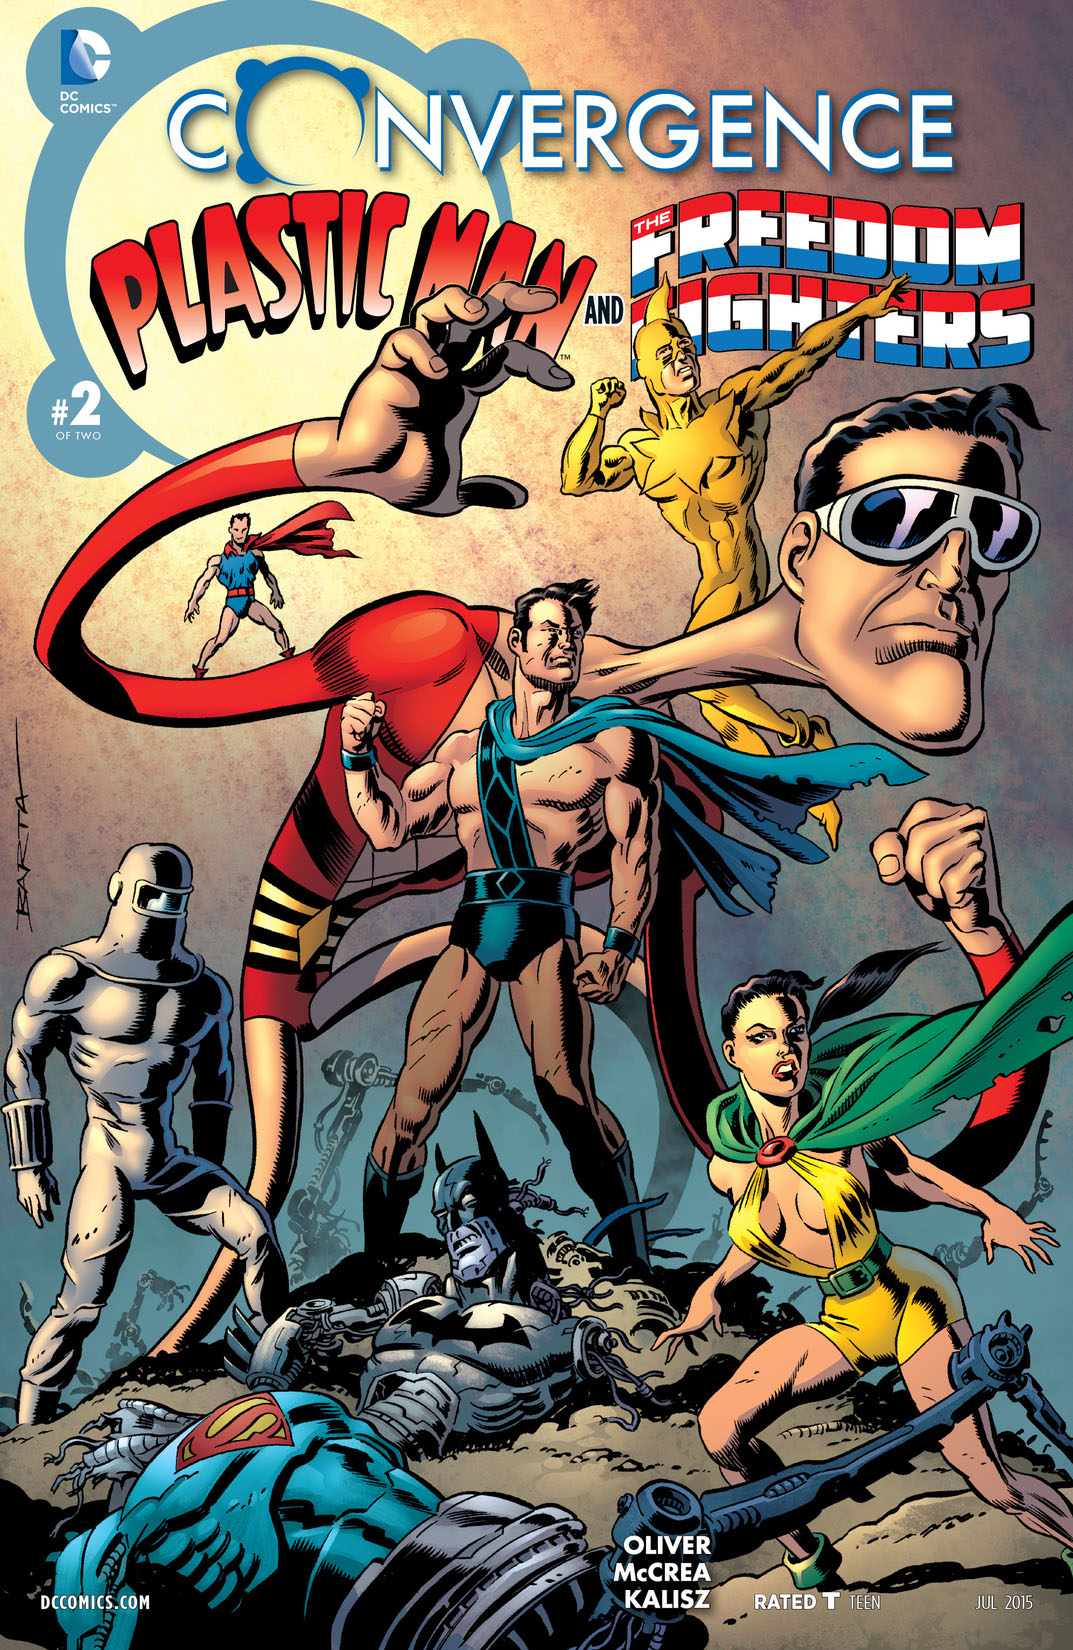 Convergence: Plastic Man and the Freedom Fighters #2 preview images